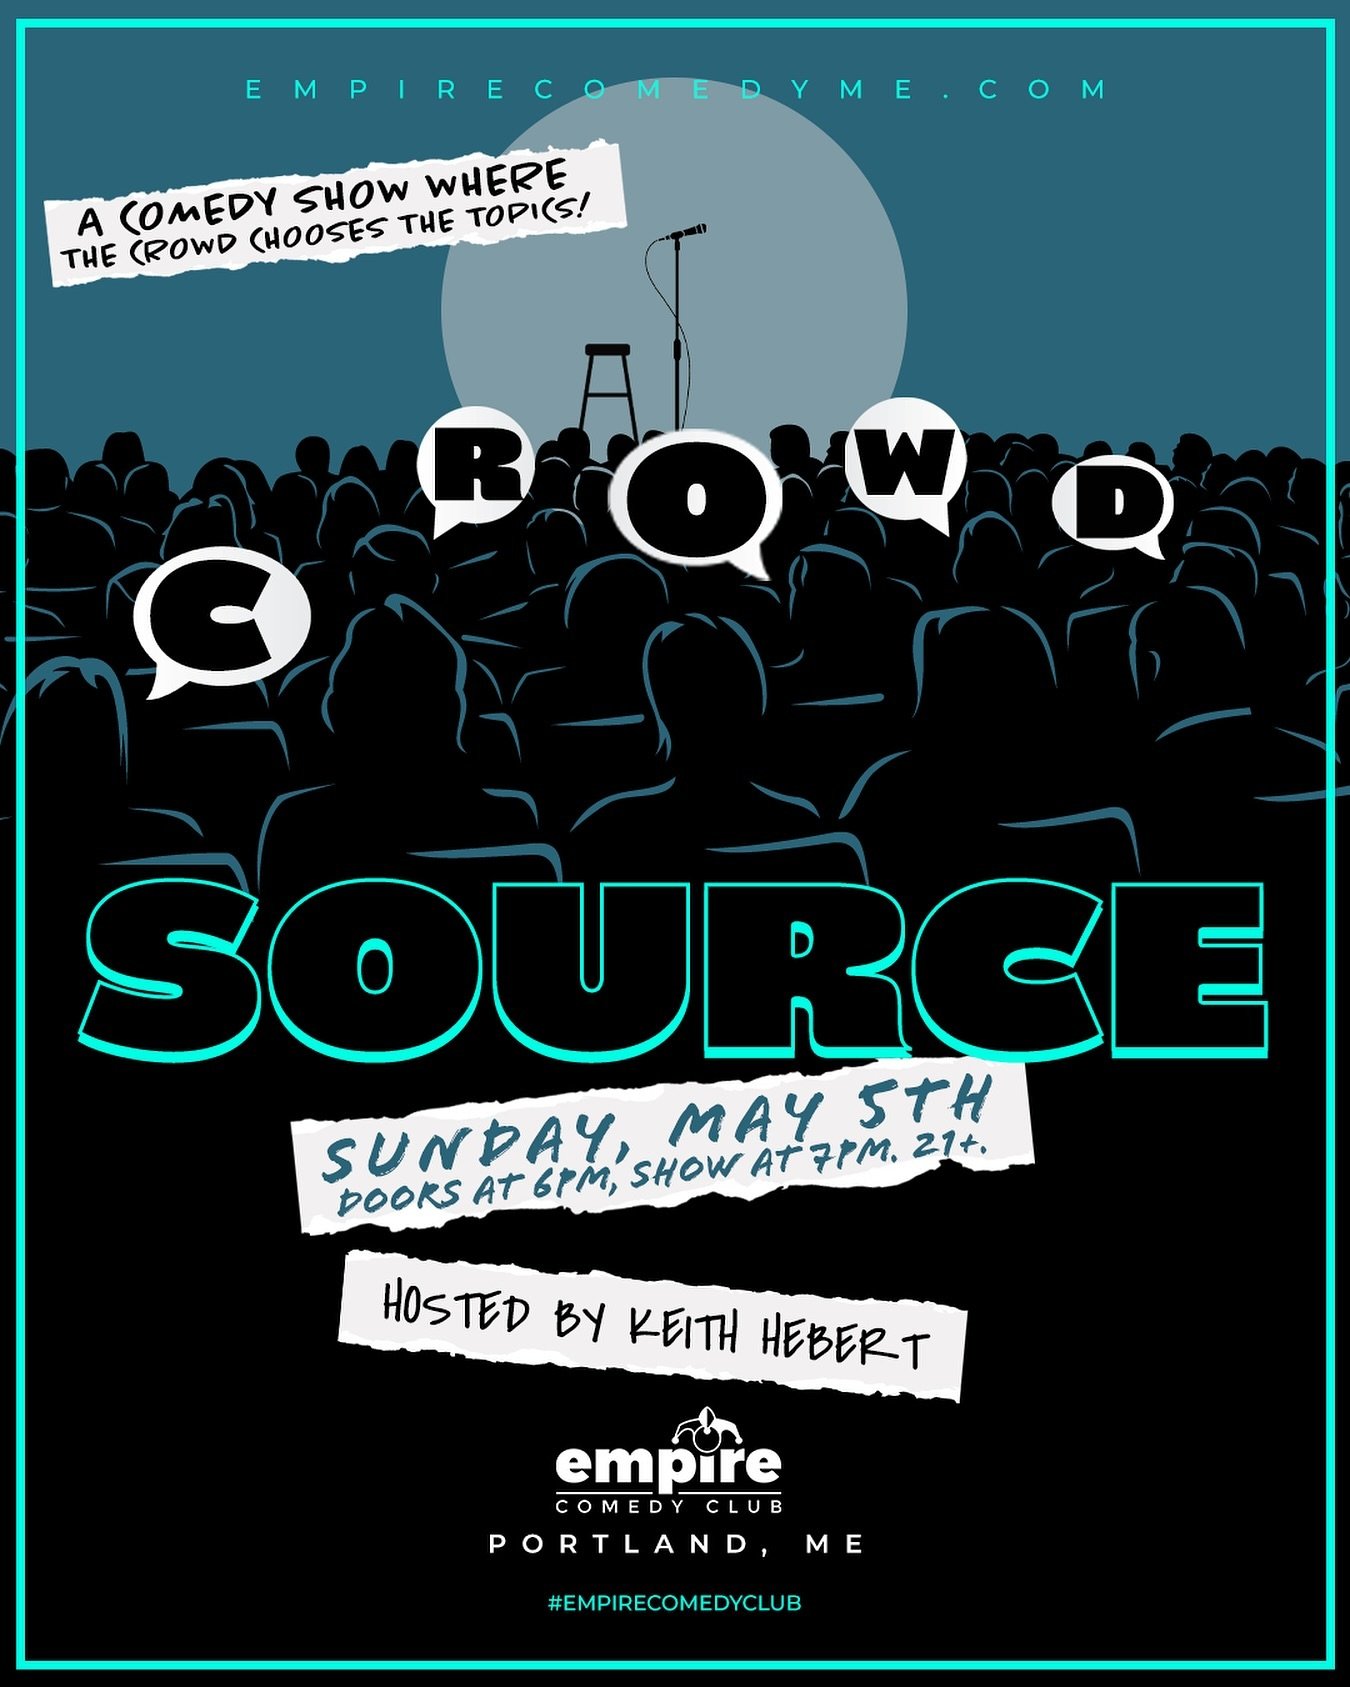 Tonight, SUNDAY, MAY 5TH! We&rsquo;re excited to be kicking off an entire month of Sunday shows with a brand new show called CROWD SOURCE! An all new comedy show, where the crowd brings the topics, and our lineup of comedians make up jokes on the fly